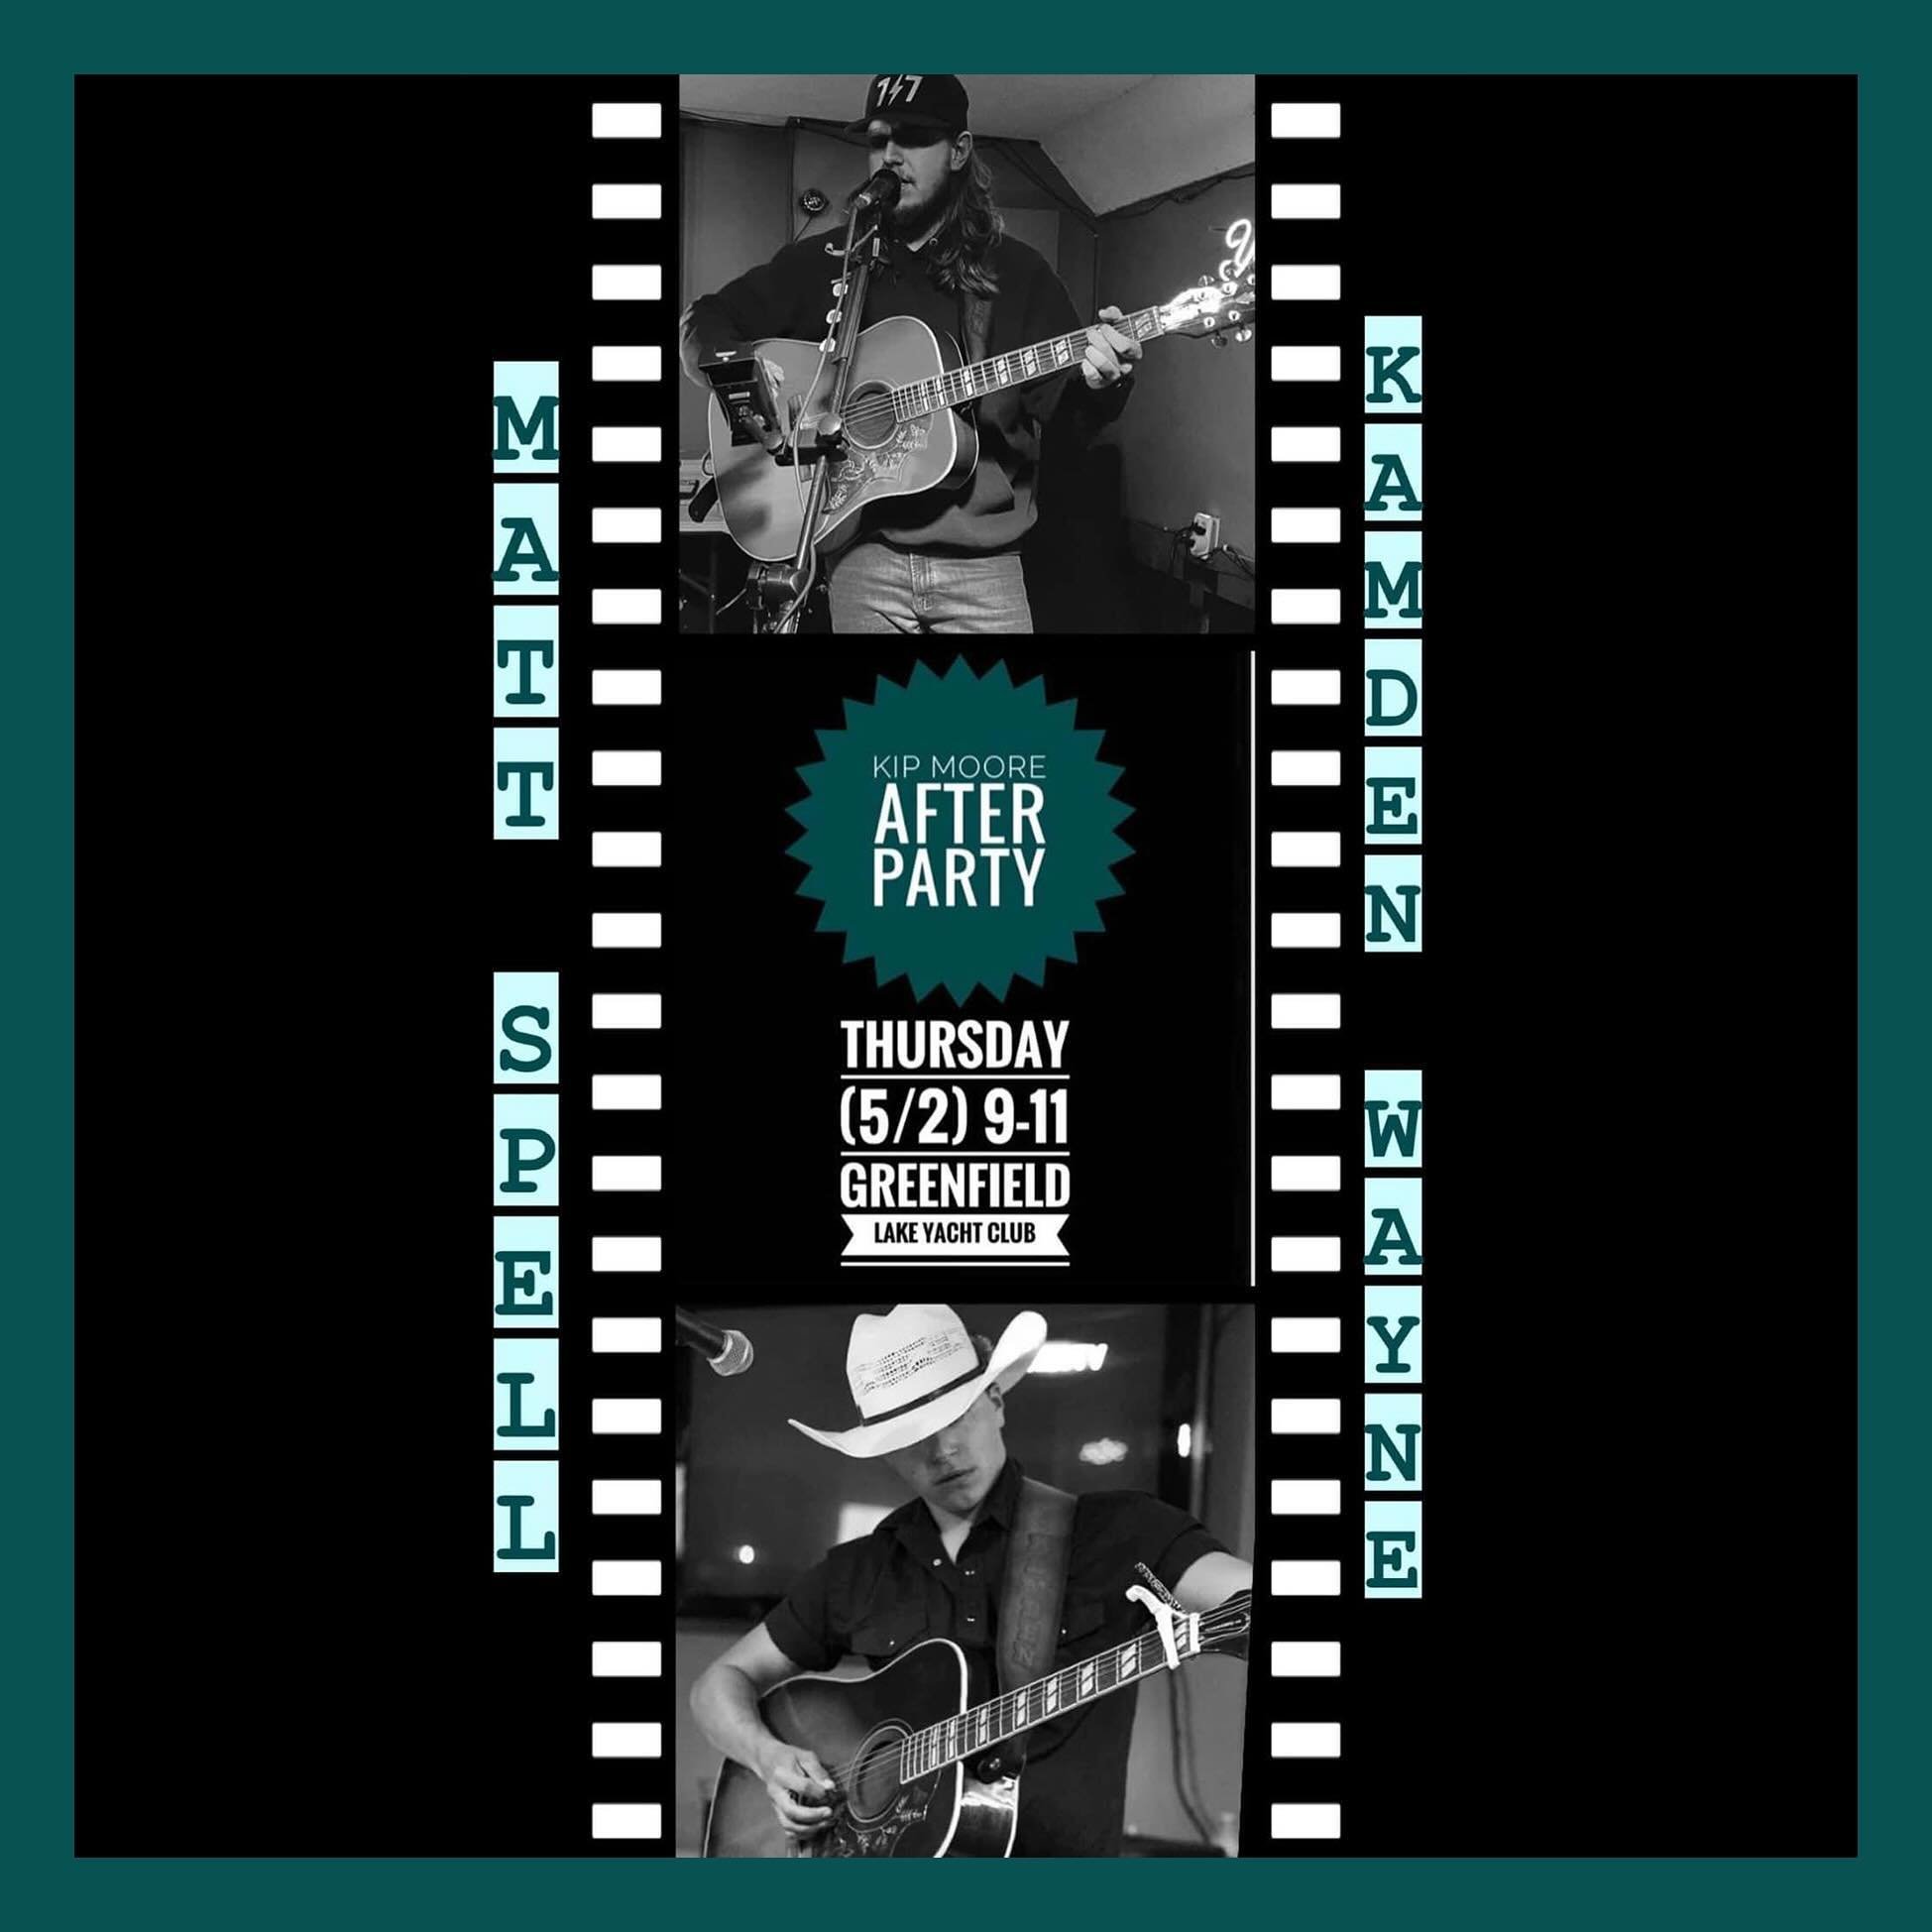 TONIGHT

Join us after the @kipmooremusic show @greenfieldlakeamp for an #afterparty w/ the @mattspell14 Duo

9pm-11pm. No Cover.

🐊🐊🐊

https://www.greenfieldlakeyachtclub.com/

#livemusic #localmusic #wilmington #wilmingtonnc #ncartists #wilmingt